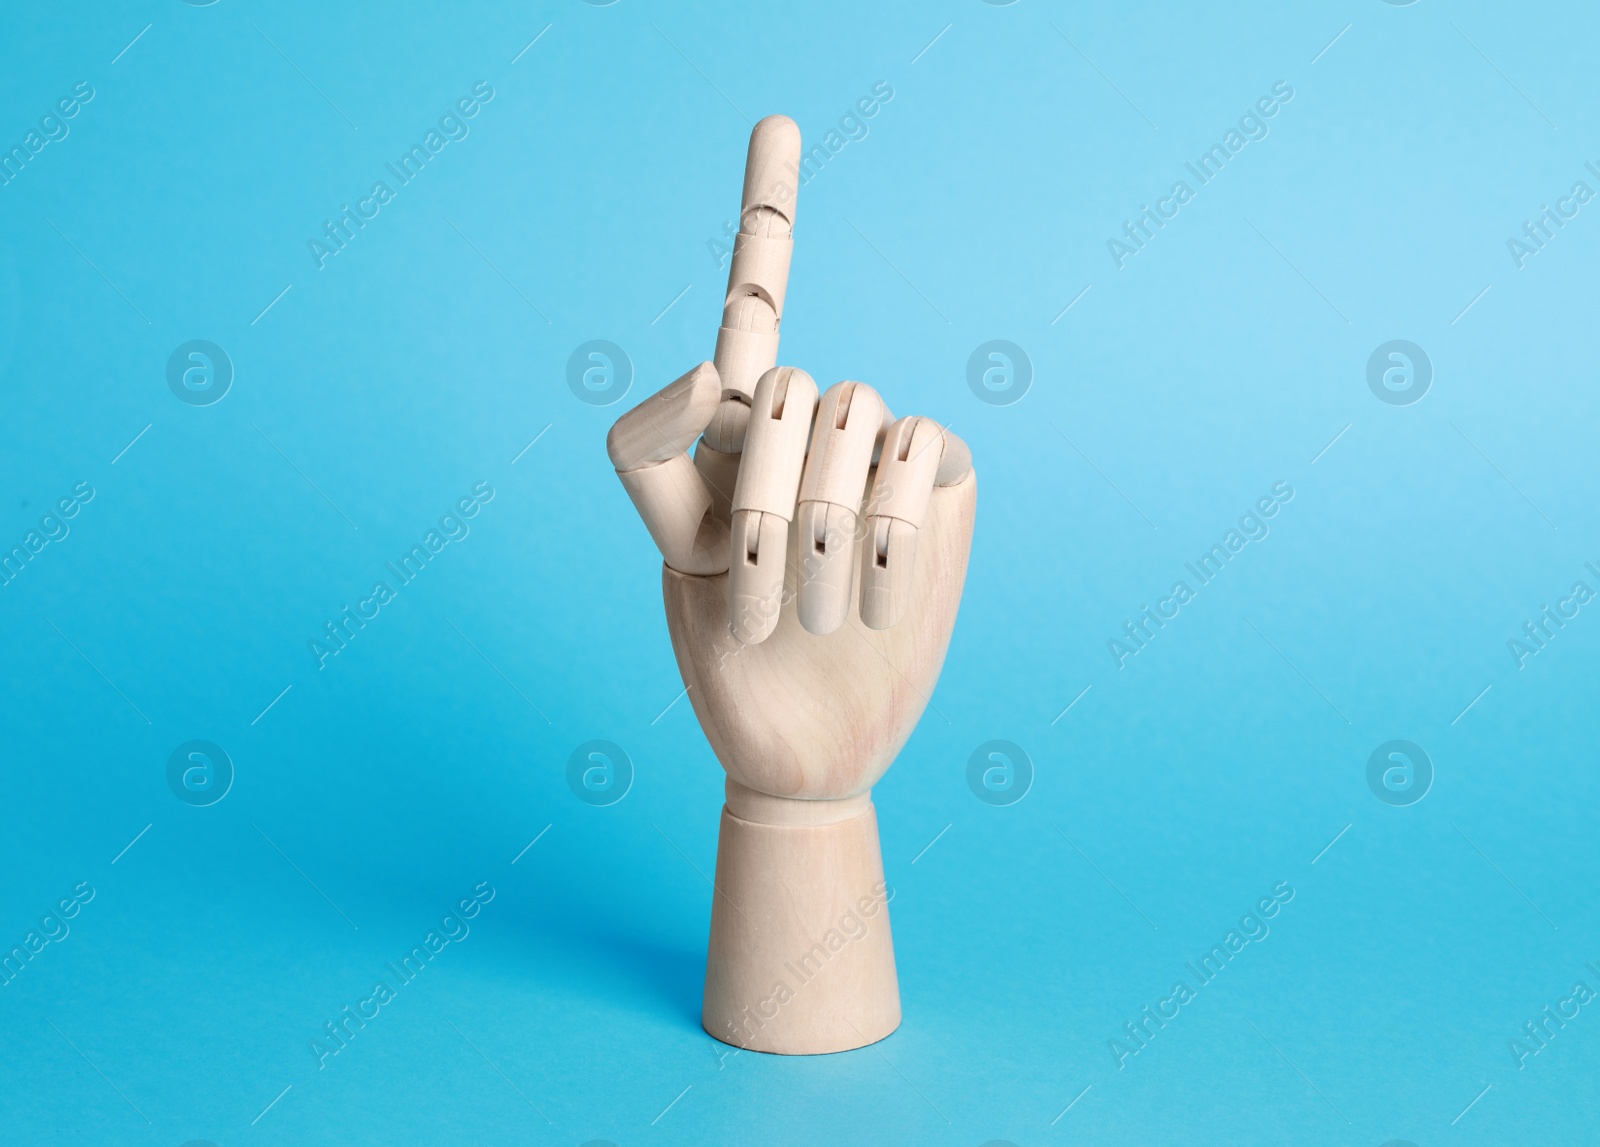 Photo of Wooden hand model on light blue background. Mannequin part